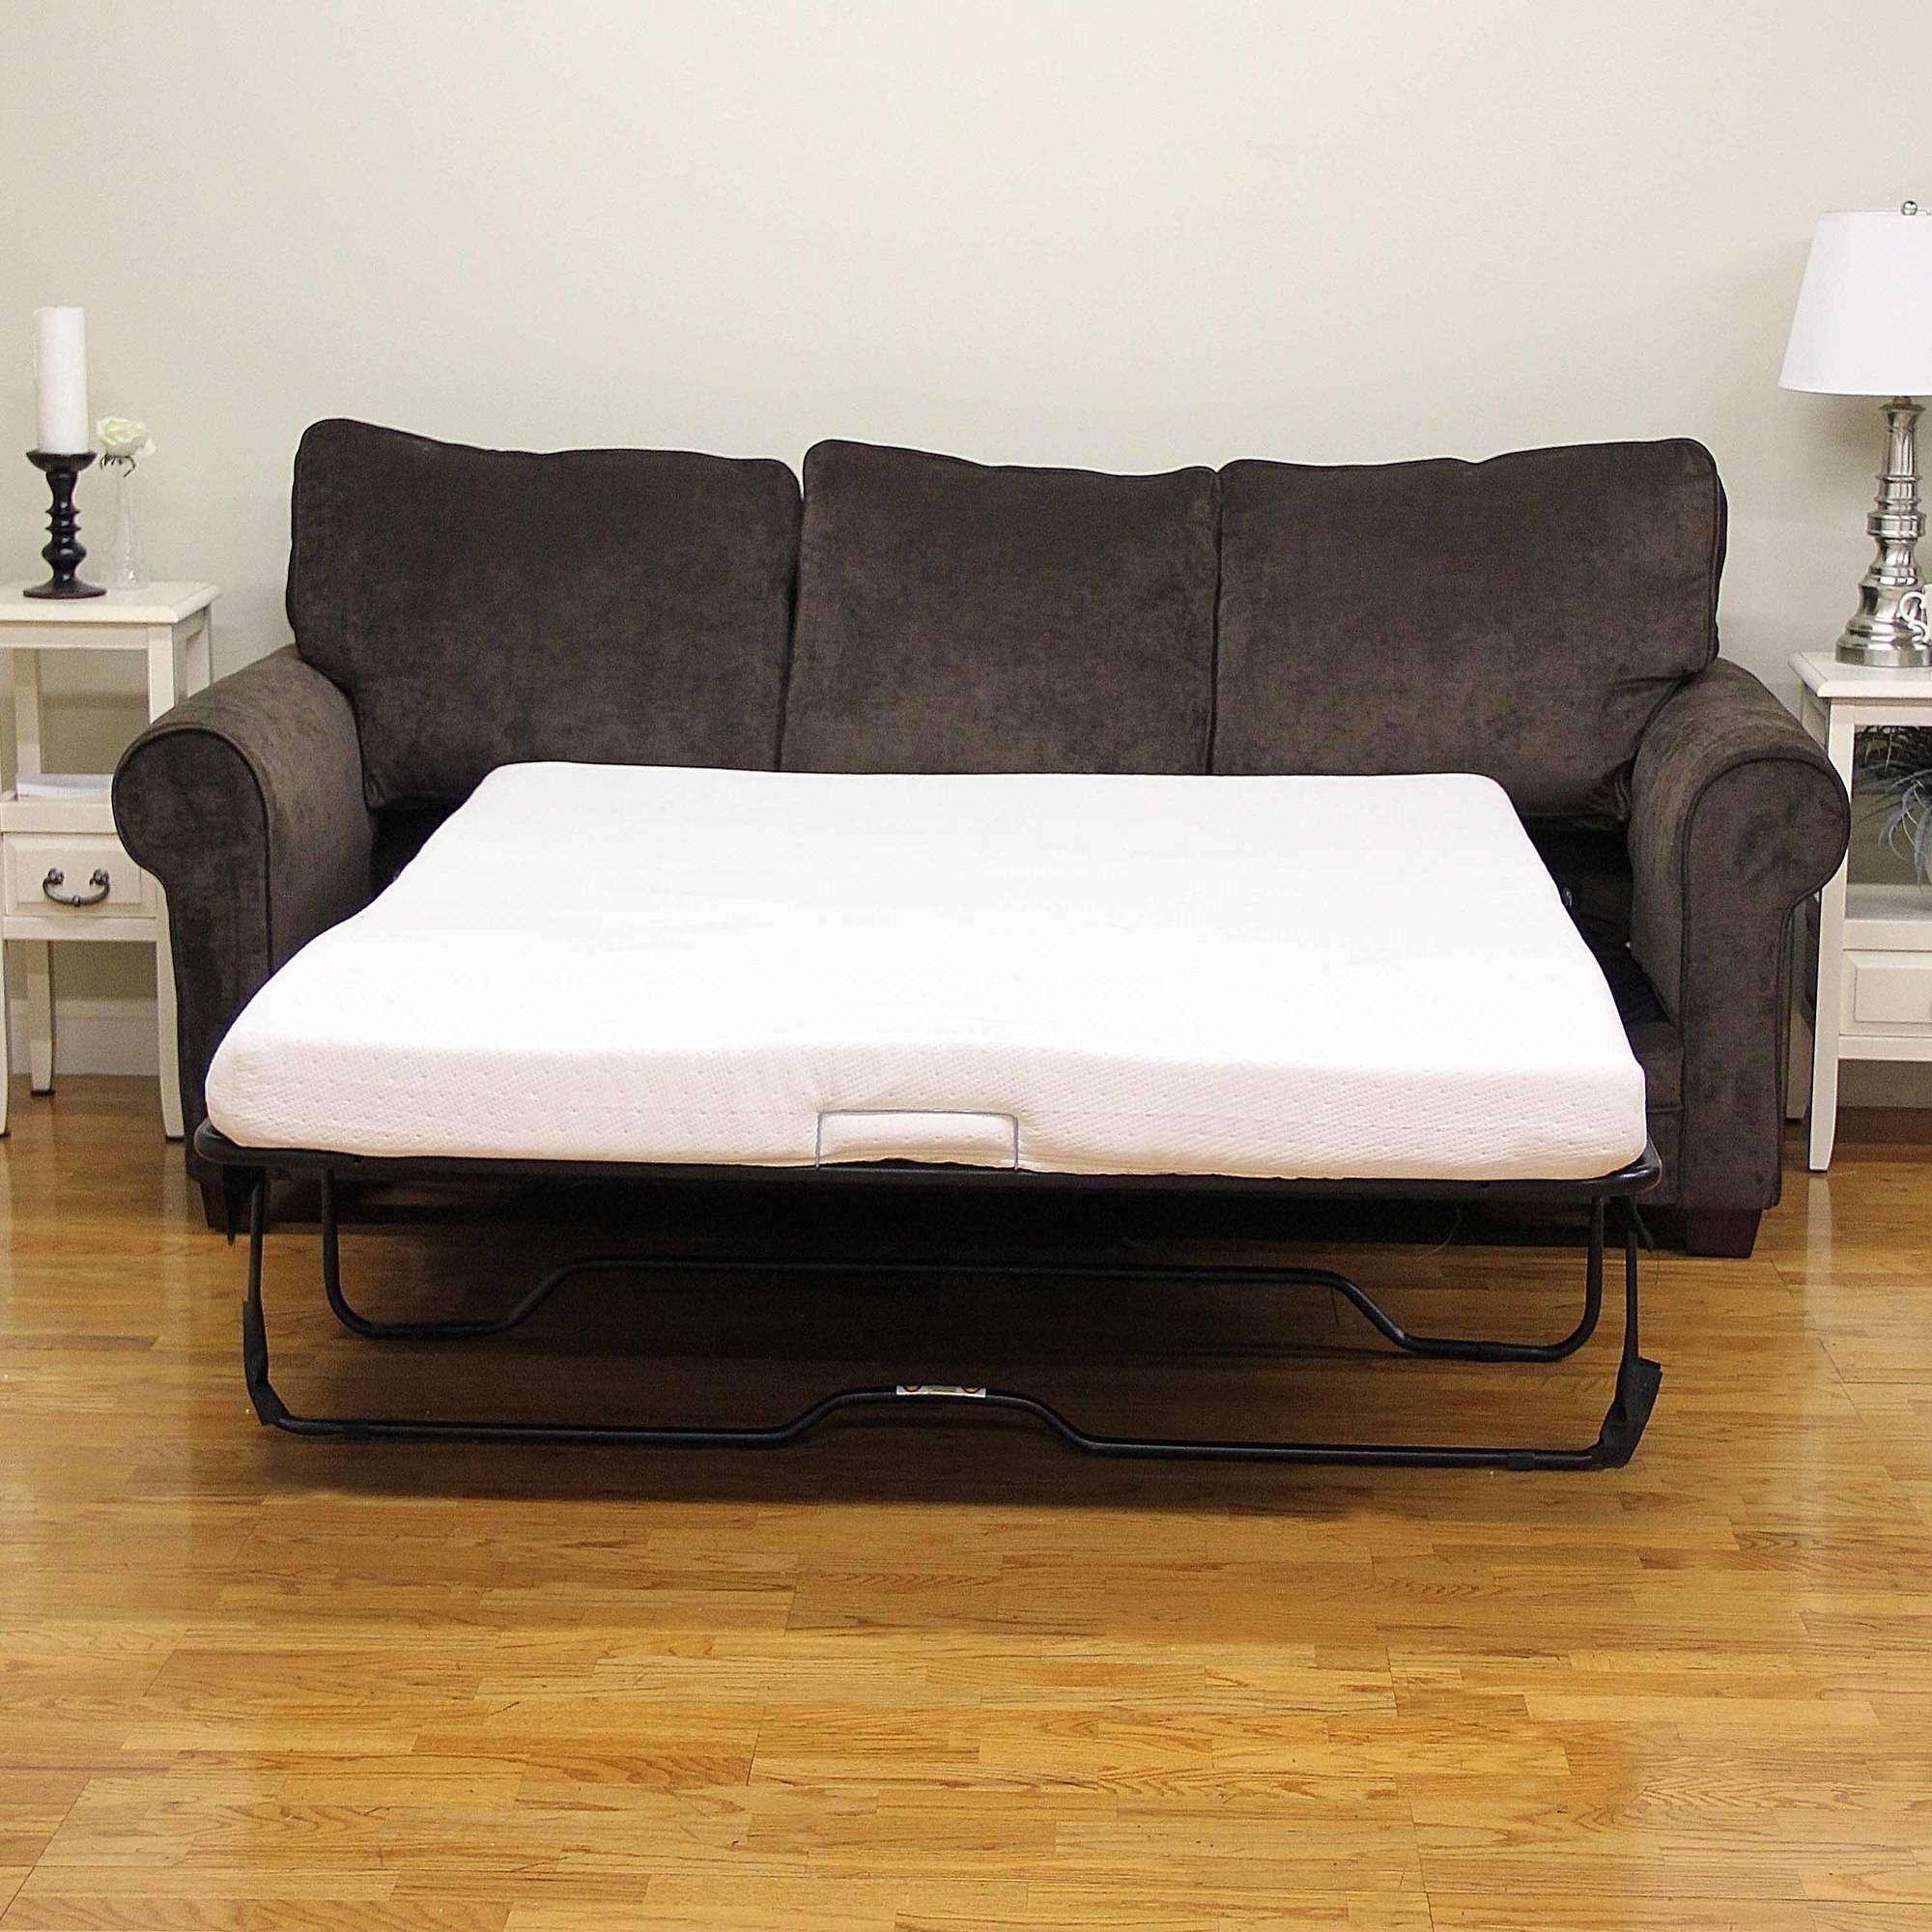 Sofa Bed Inflatable Mattress | Sofa Gallery | Kengire With Regard To Inflatable Sofa Beds Mattress (View 15 of 20)